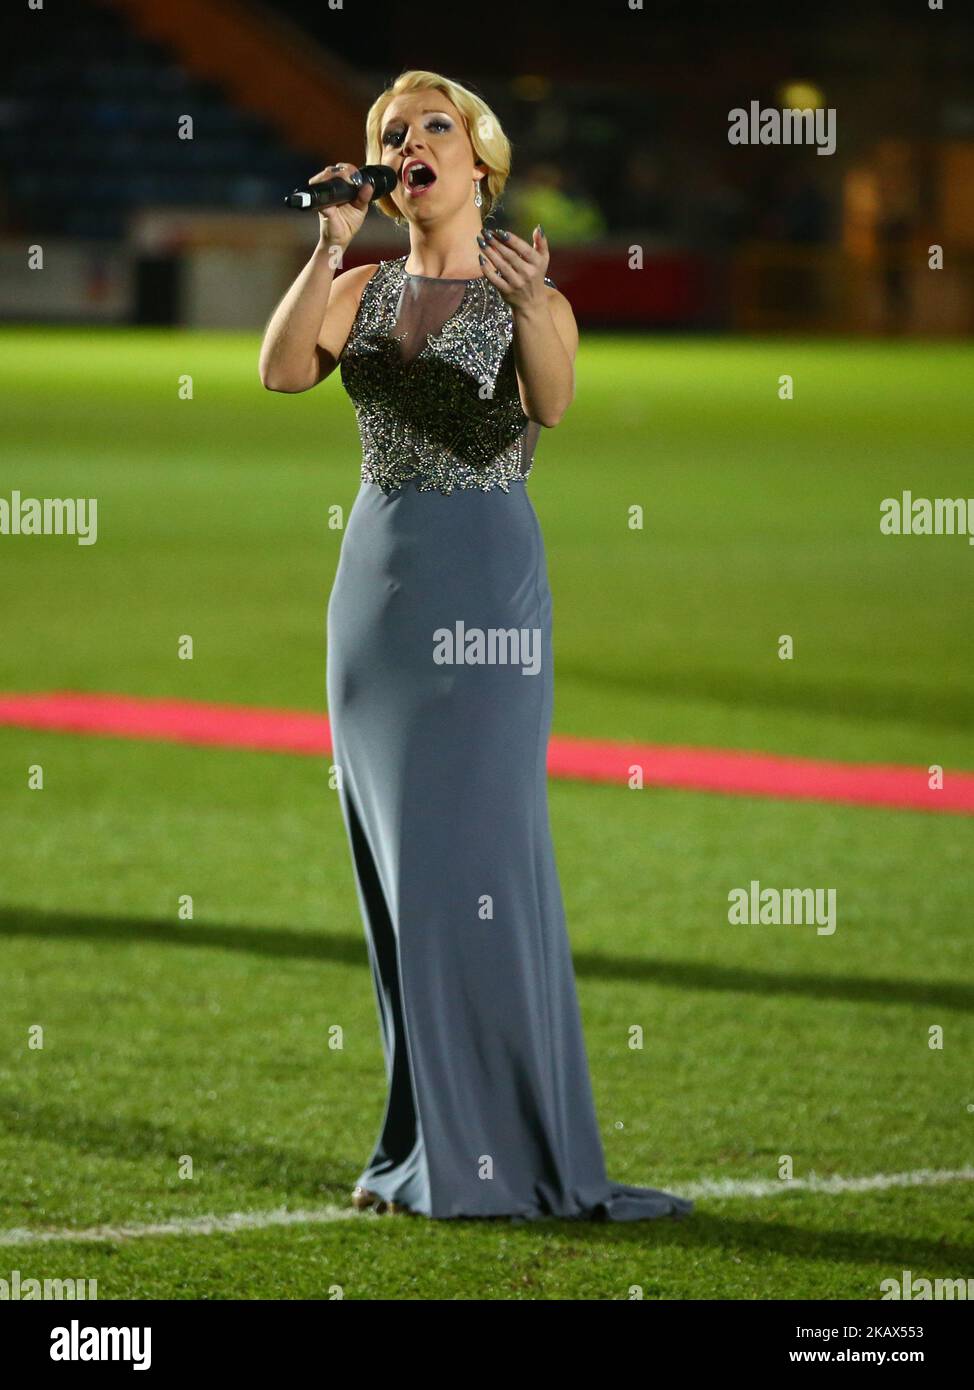 Emily Haig singing the National Anthem during The FA WSL Continental Tyres Cup Final match between Arsenal against Manchester City Women at Adams Park stadium, Wycombe England on 14 March 2018 (Photo by Kieran Galvin/NurPhoto)  Stock Photo